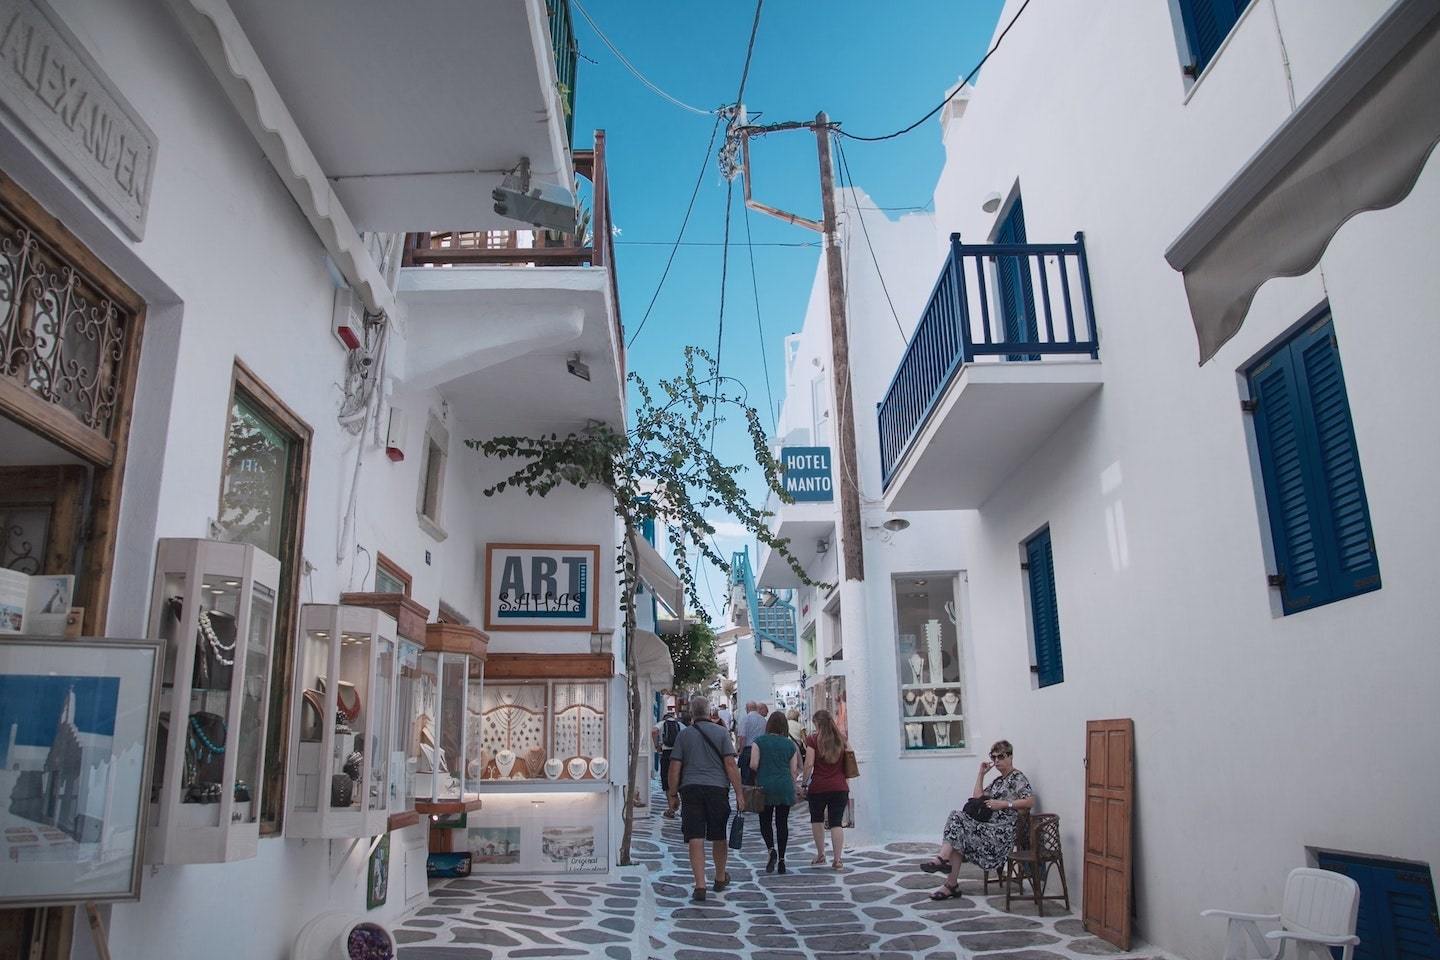 White buildings and shops in a small street in Mykonos, Greece